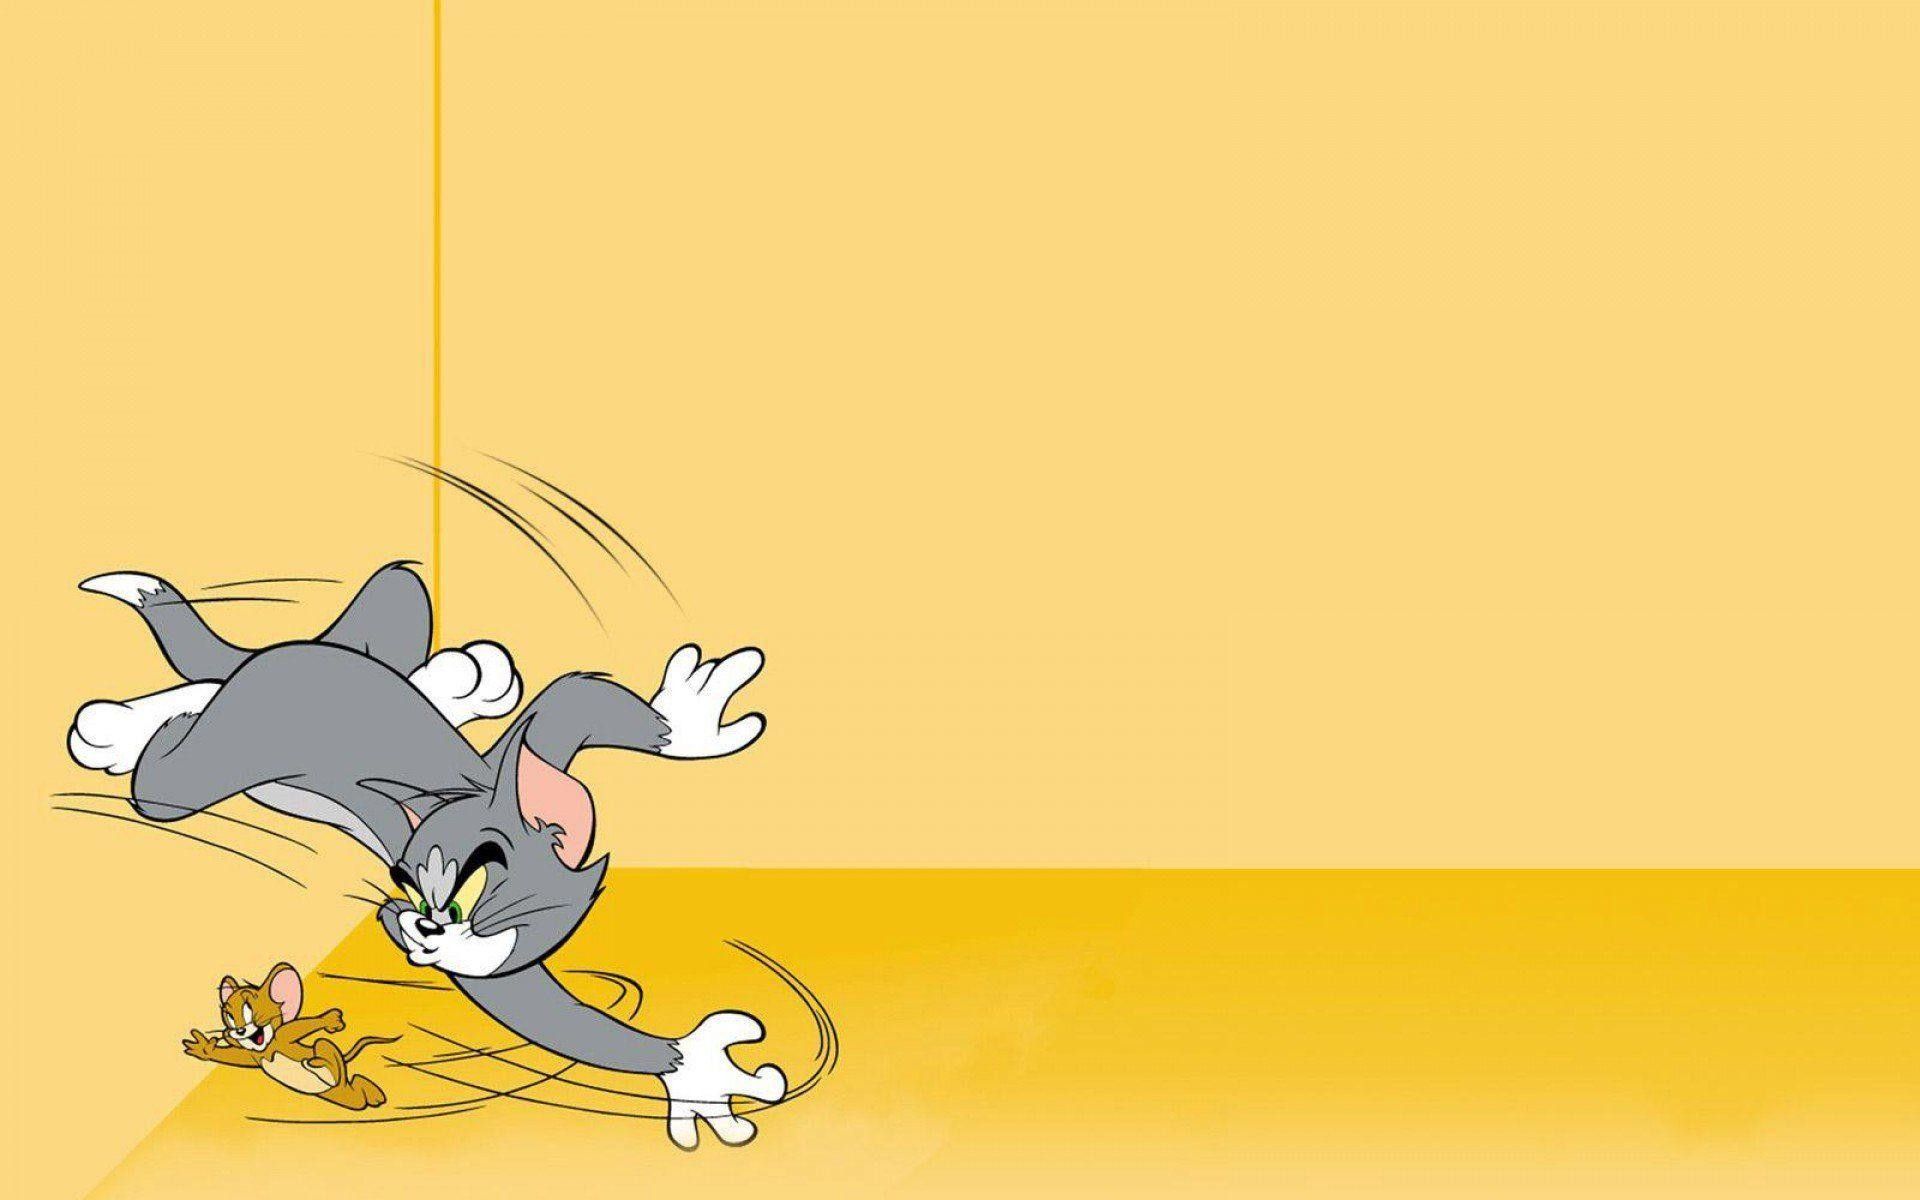 A cartoon cat is falling off the wall - Tom and Jerry